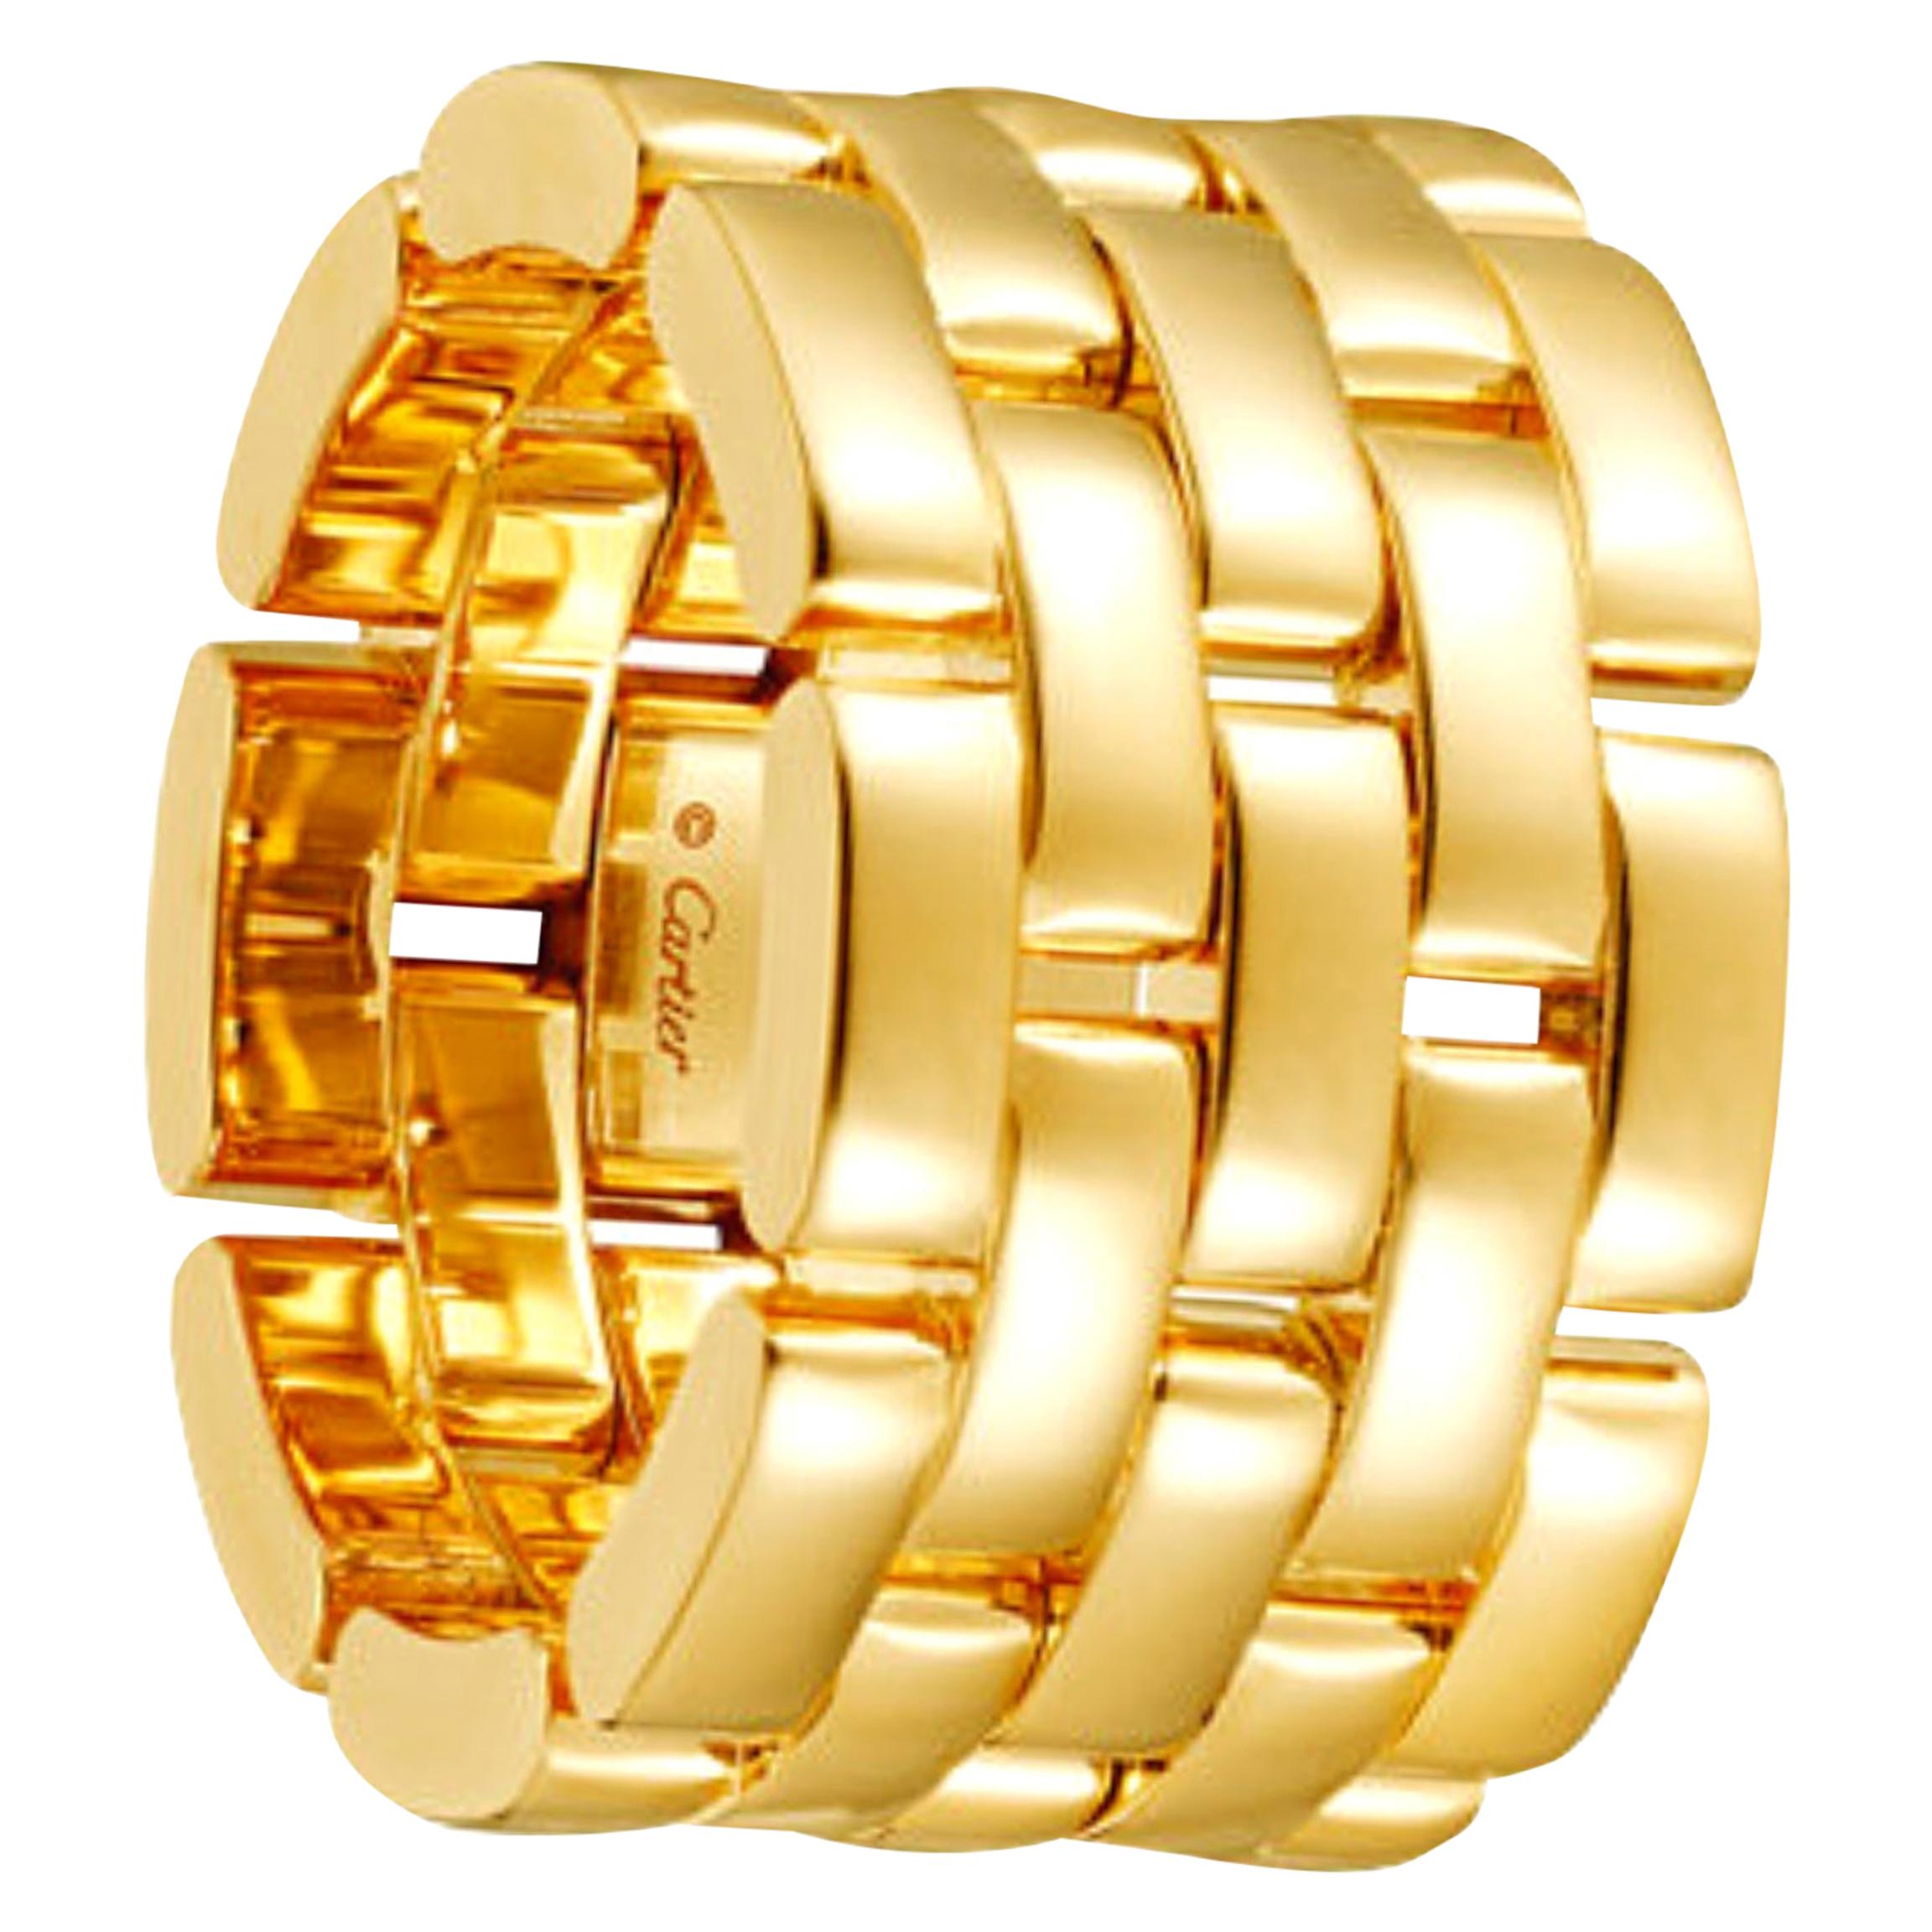 Cartier "Maillon" Panthere 5 Rows 18K Yellow Gold Ring, Size 6 Maillon Panthere